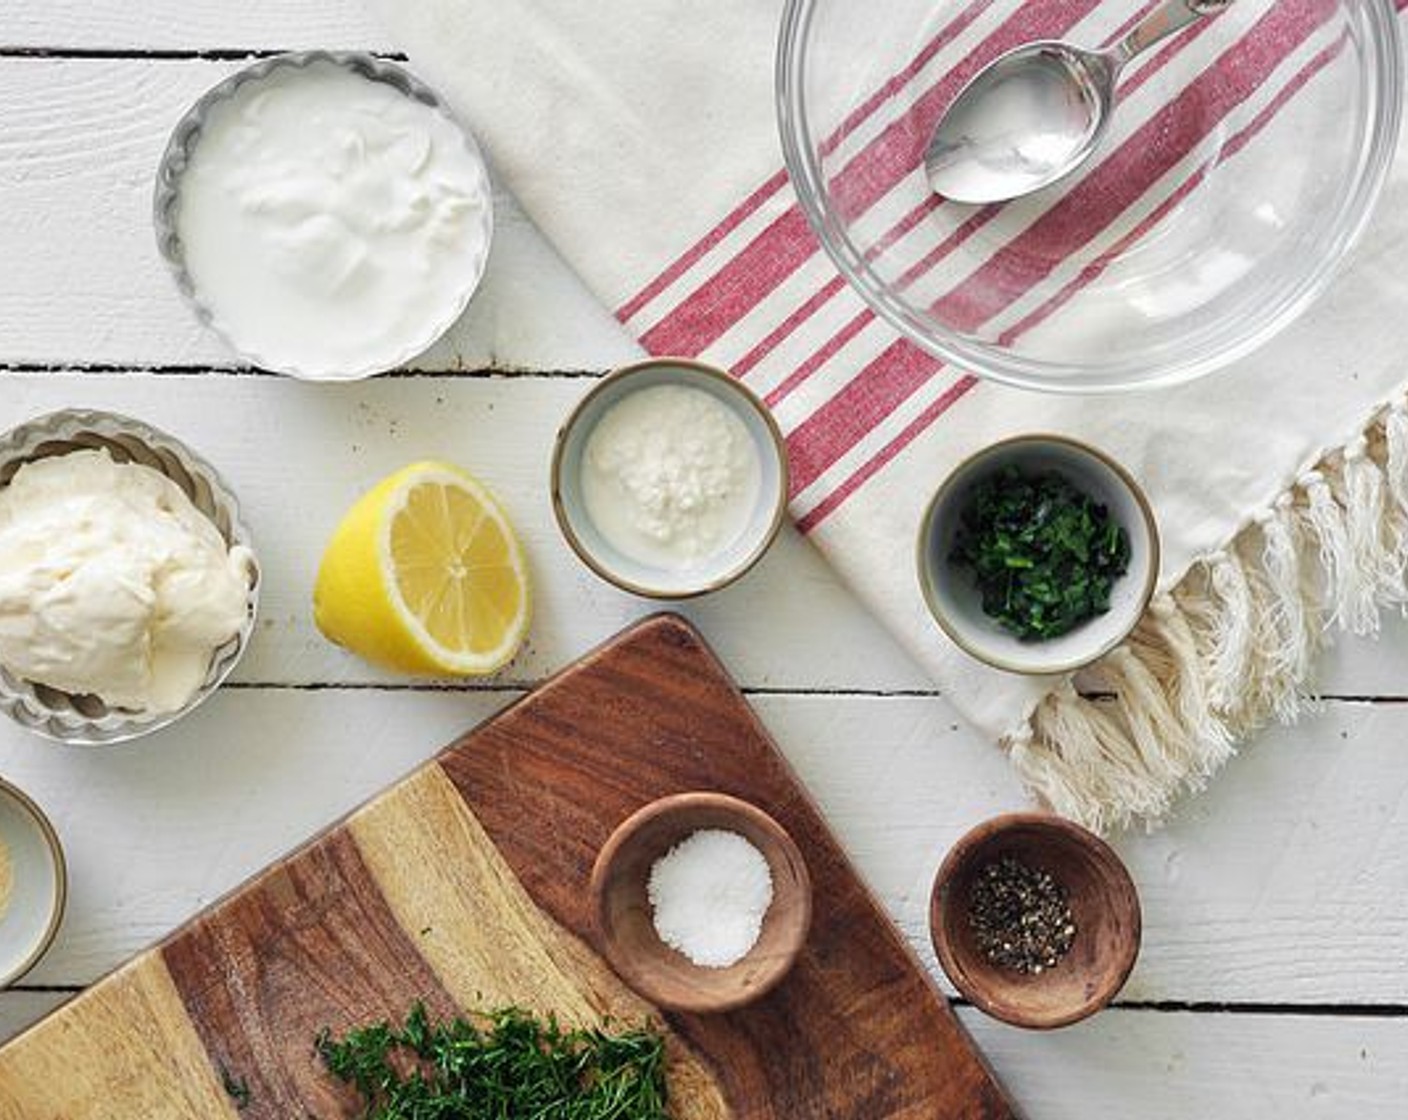 step 12 Whisk Mayonnaise (1/3 cup), Sour Cream (1/3 cup), Horseradish (1 Tbsp), juice of Lemon (1/2), Fresh Parsley (1 Tbsp), Salt (1/2 tsp), Freshly Ground Black Pepper (1/2 tsp), McCormick® Garlic Powder (1/2 tsp) and Fresh Dill (1/4 cup) together in a small bowl, until smooth.